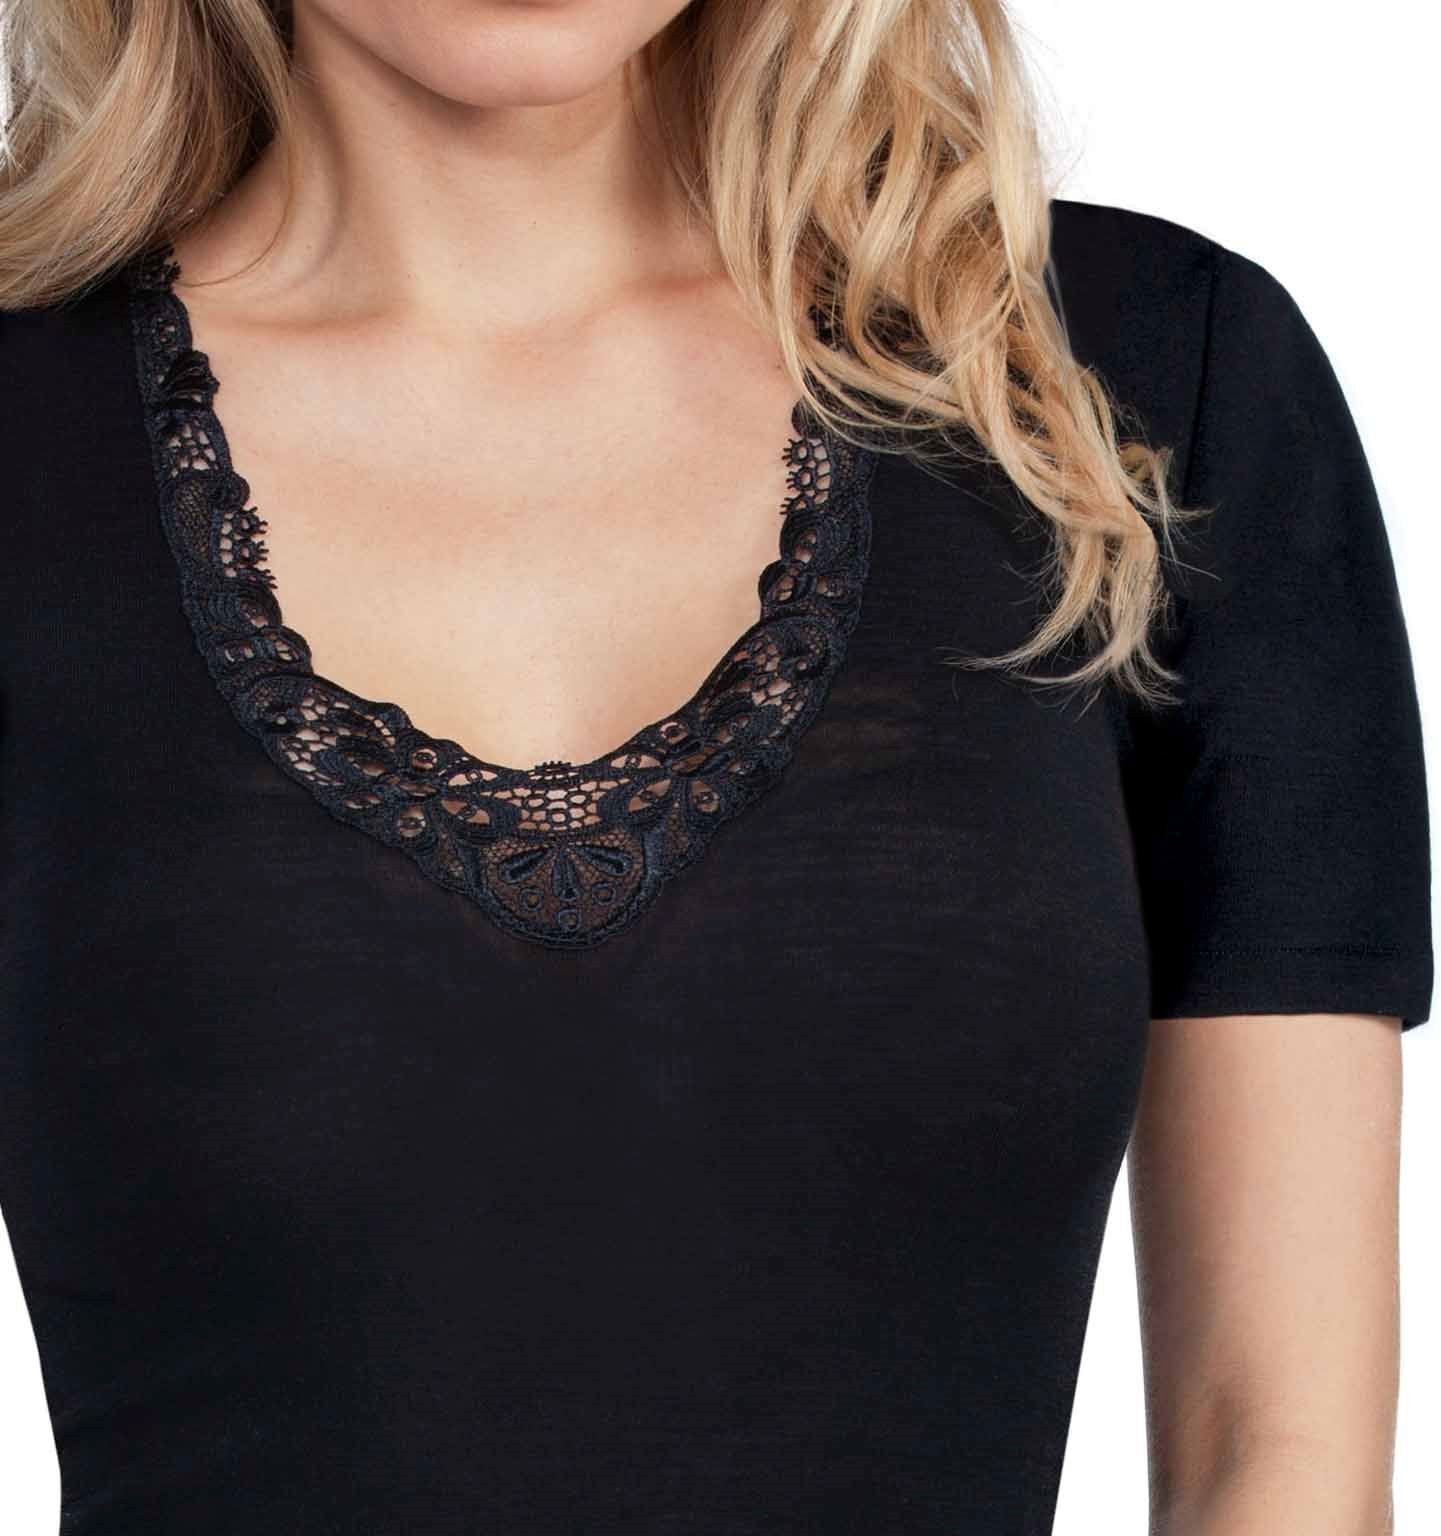 Wool & Silk Macramé Lace Top by EGi from Italy